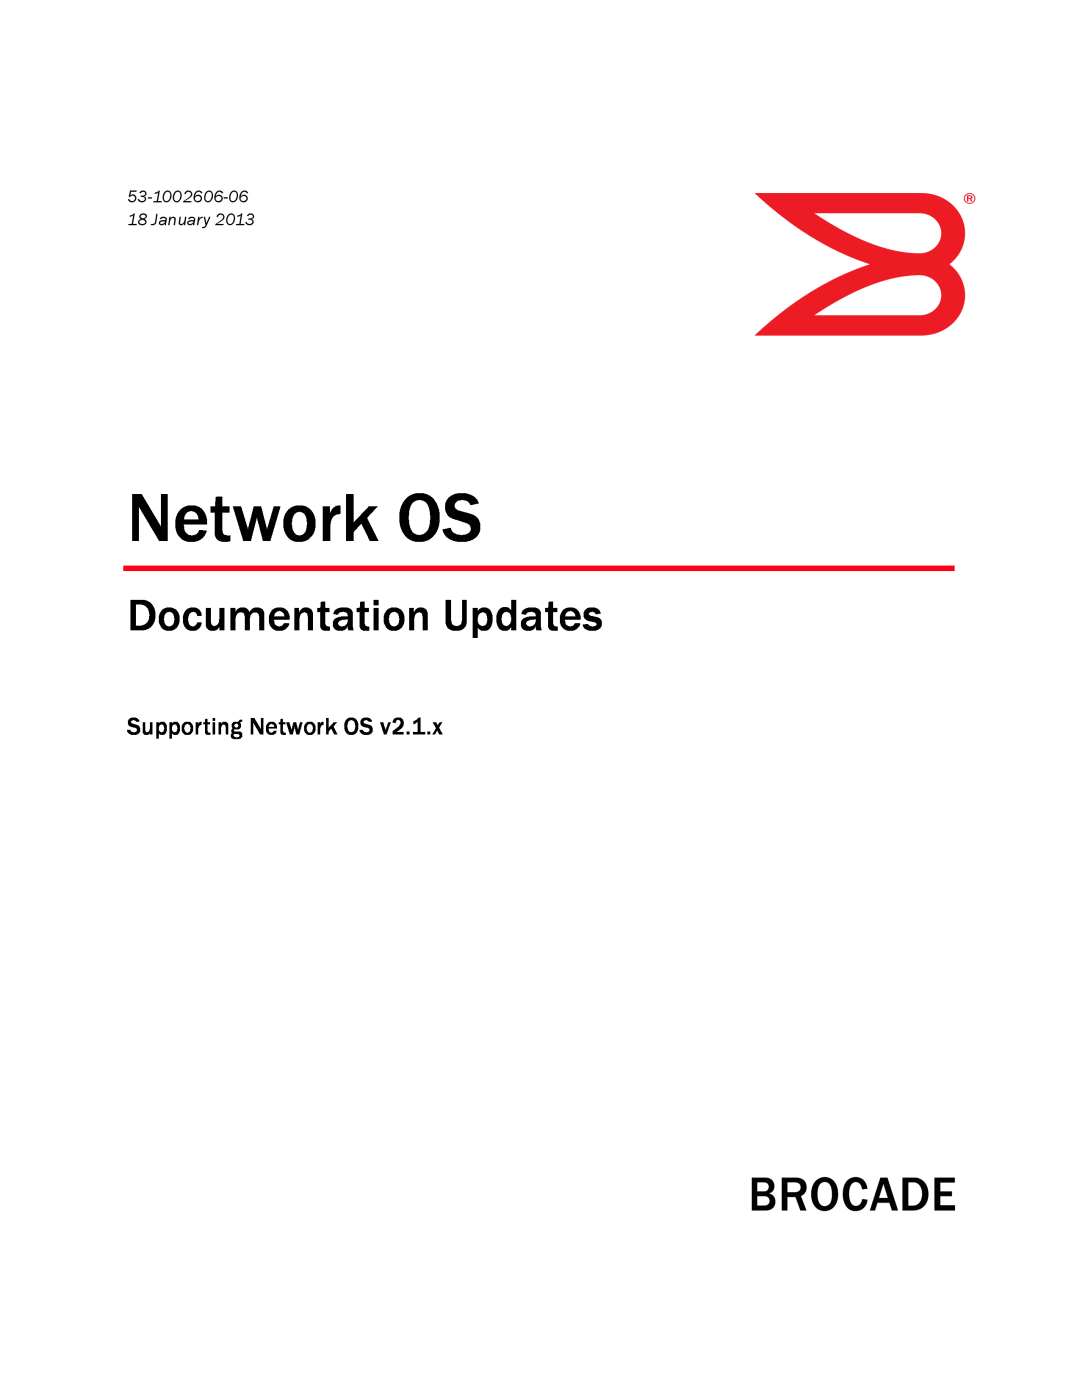 Brocade Communications Systems 2.1 manual 53-1002606-06, January, Documentation Updates, Supporting Network OS 